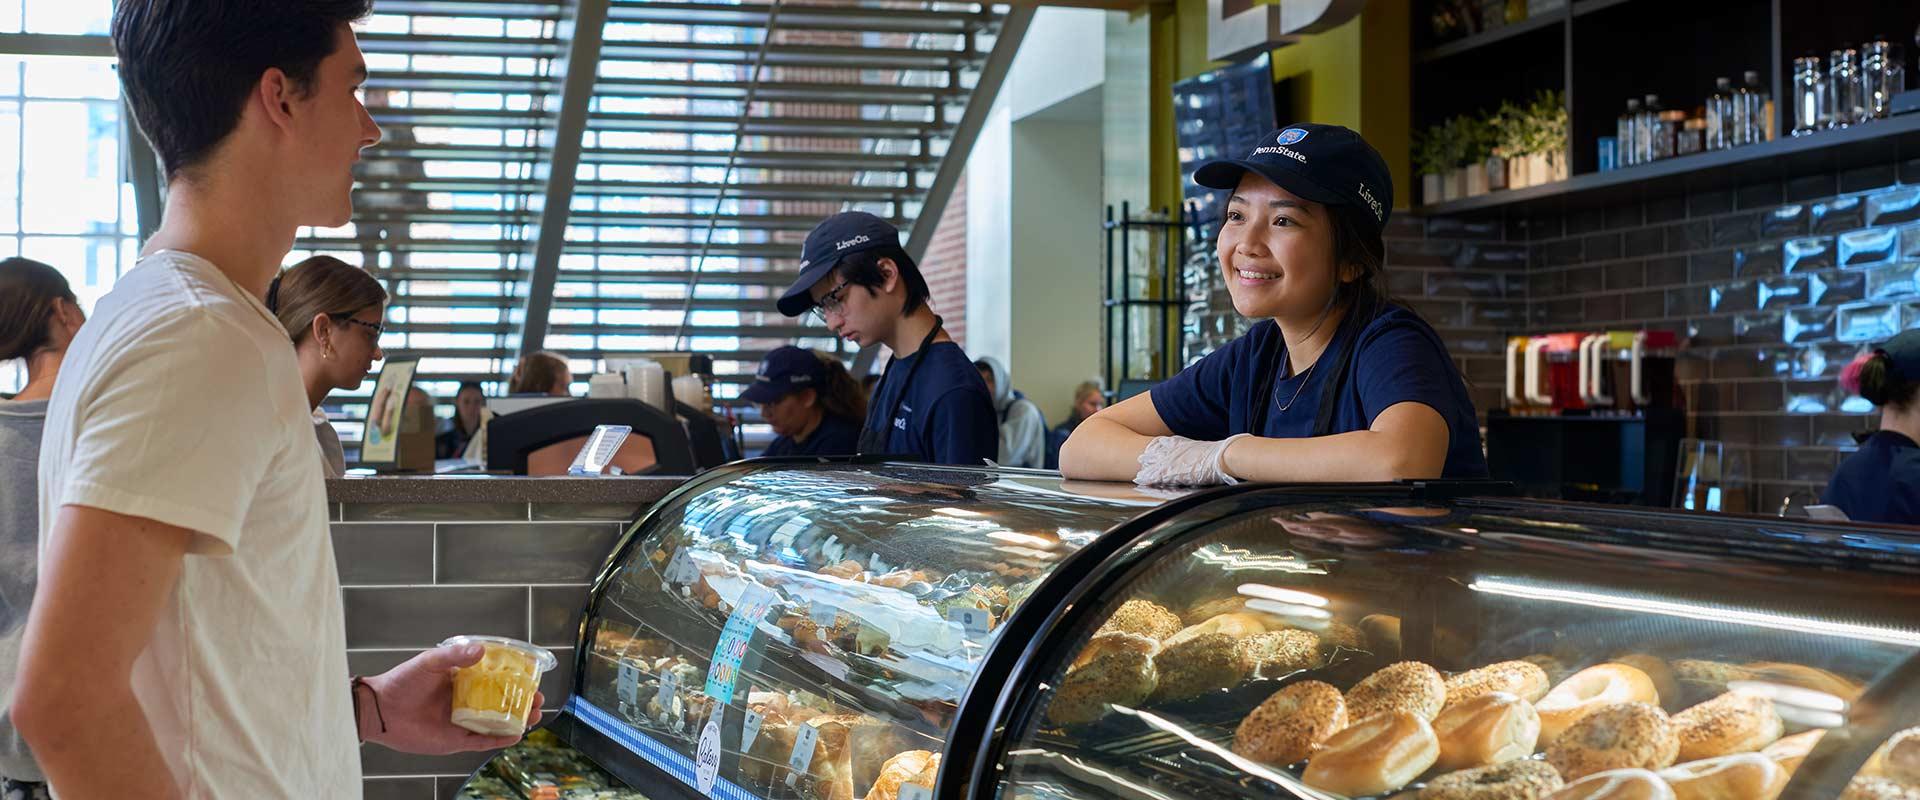 Student employee helps customer at campus cafe